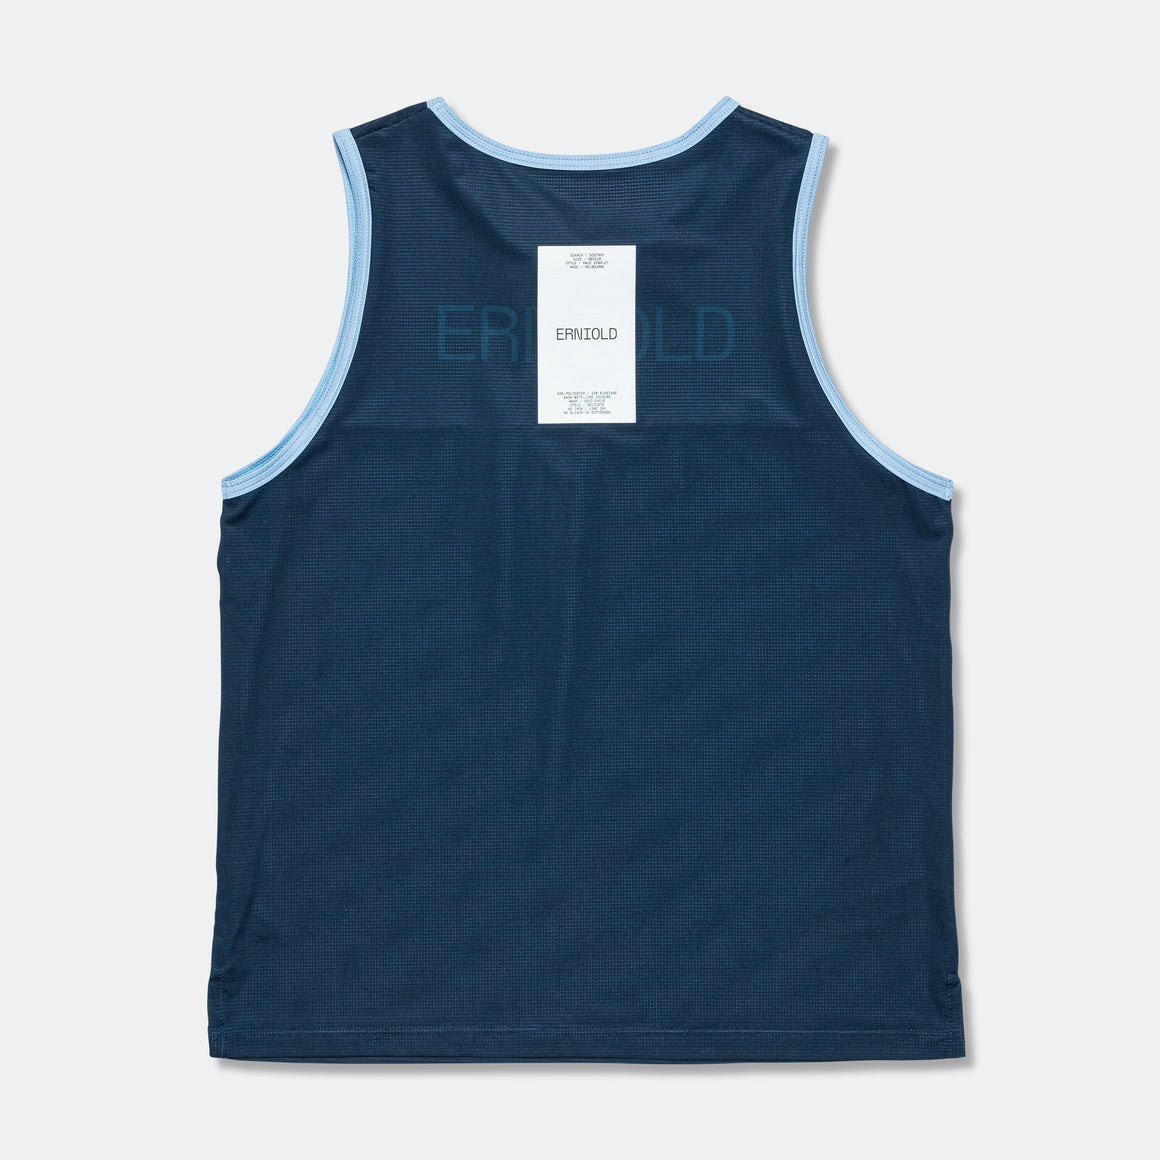 Erniold - Womens Race Singlet - Harrier - Up There Athletics